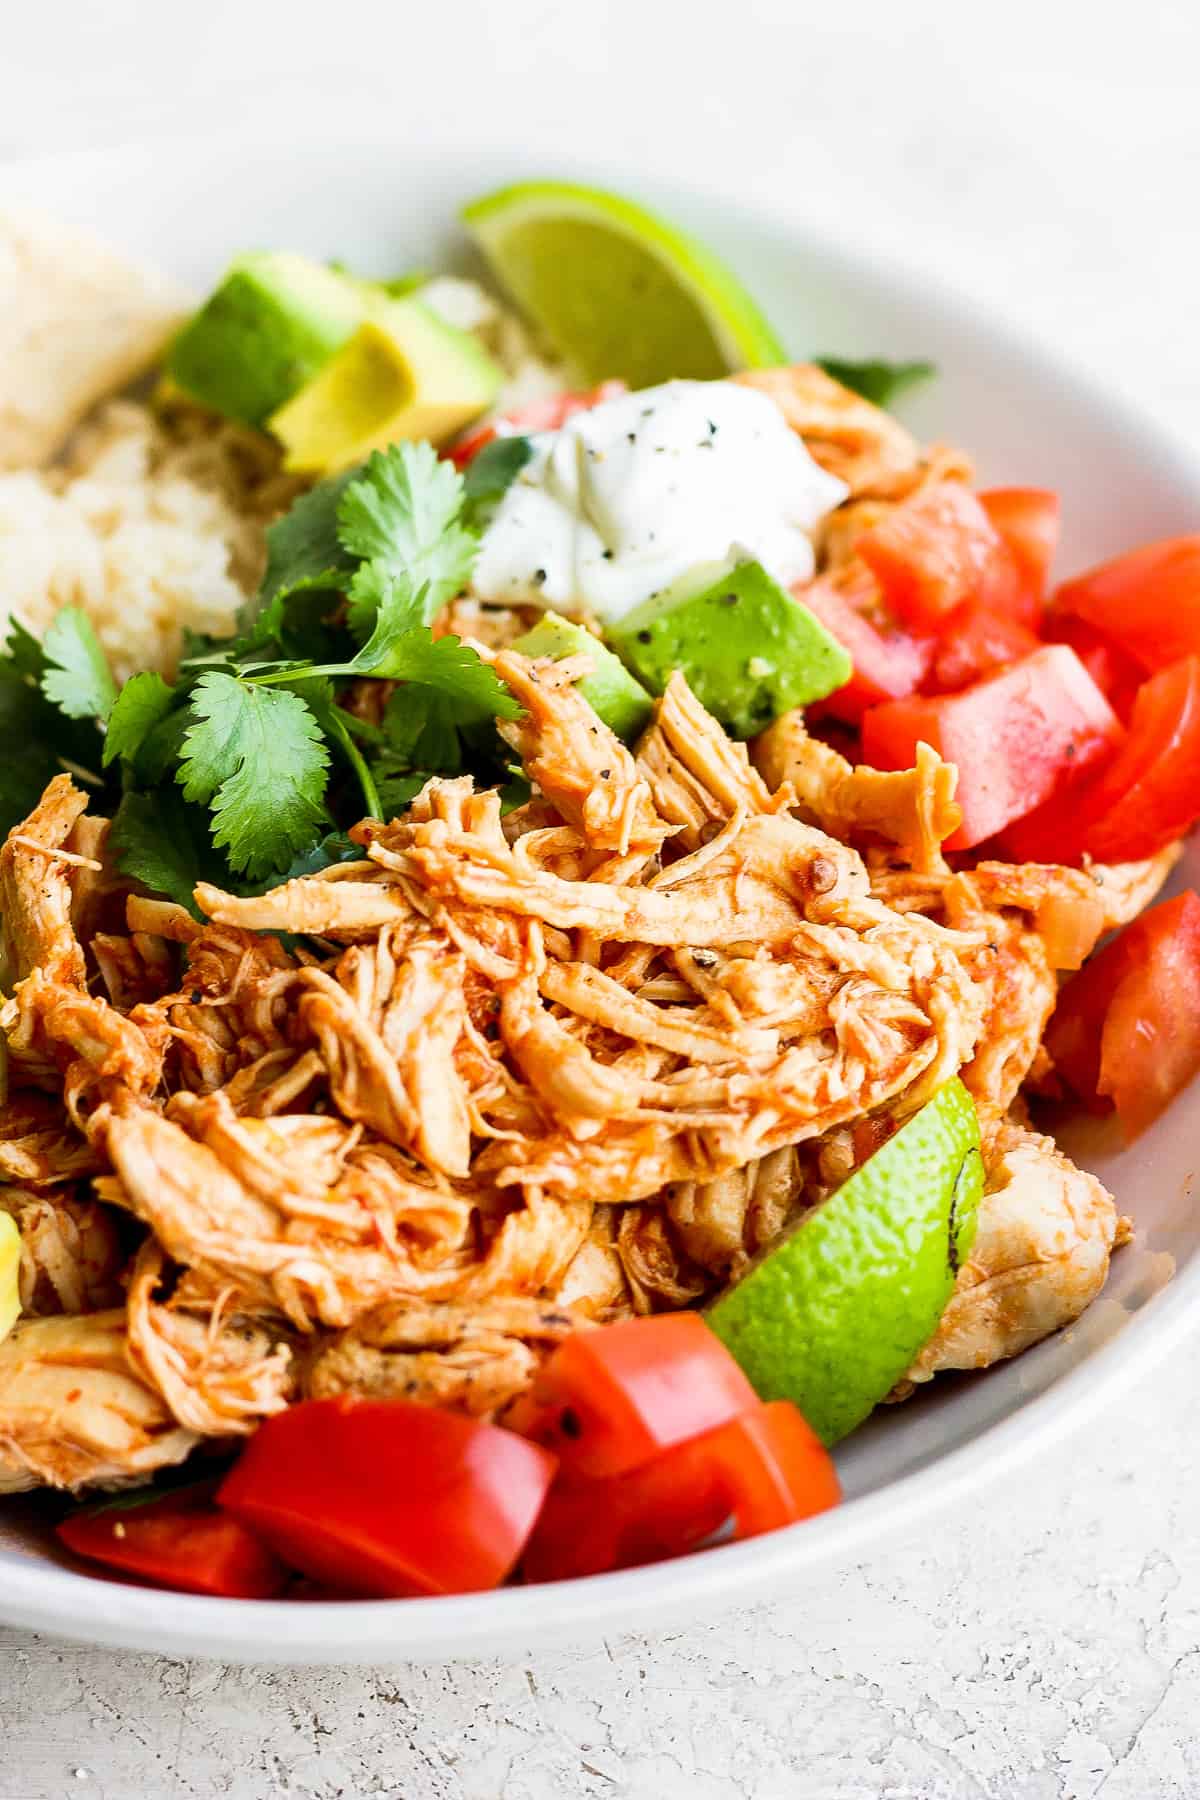 Chicken tinga in a bowl.